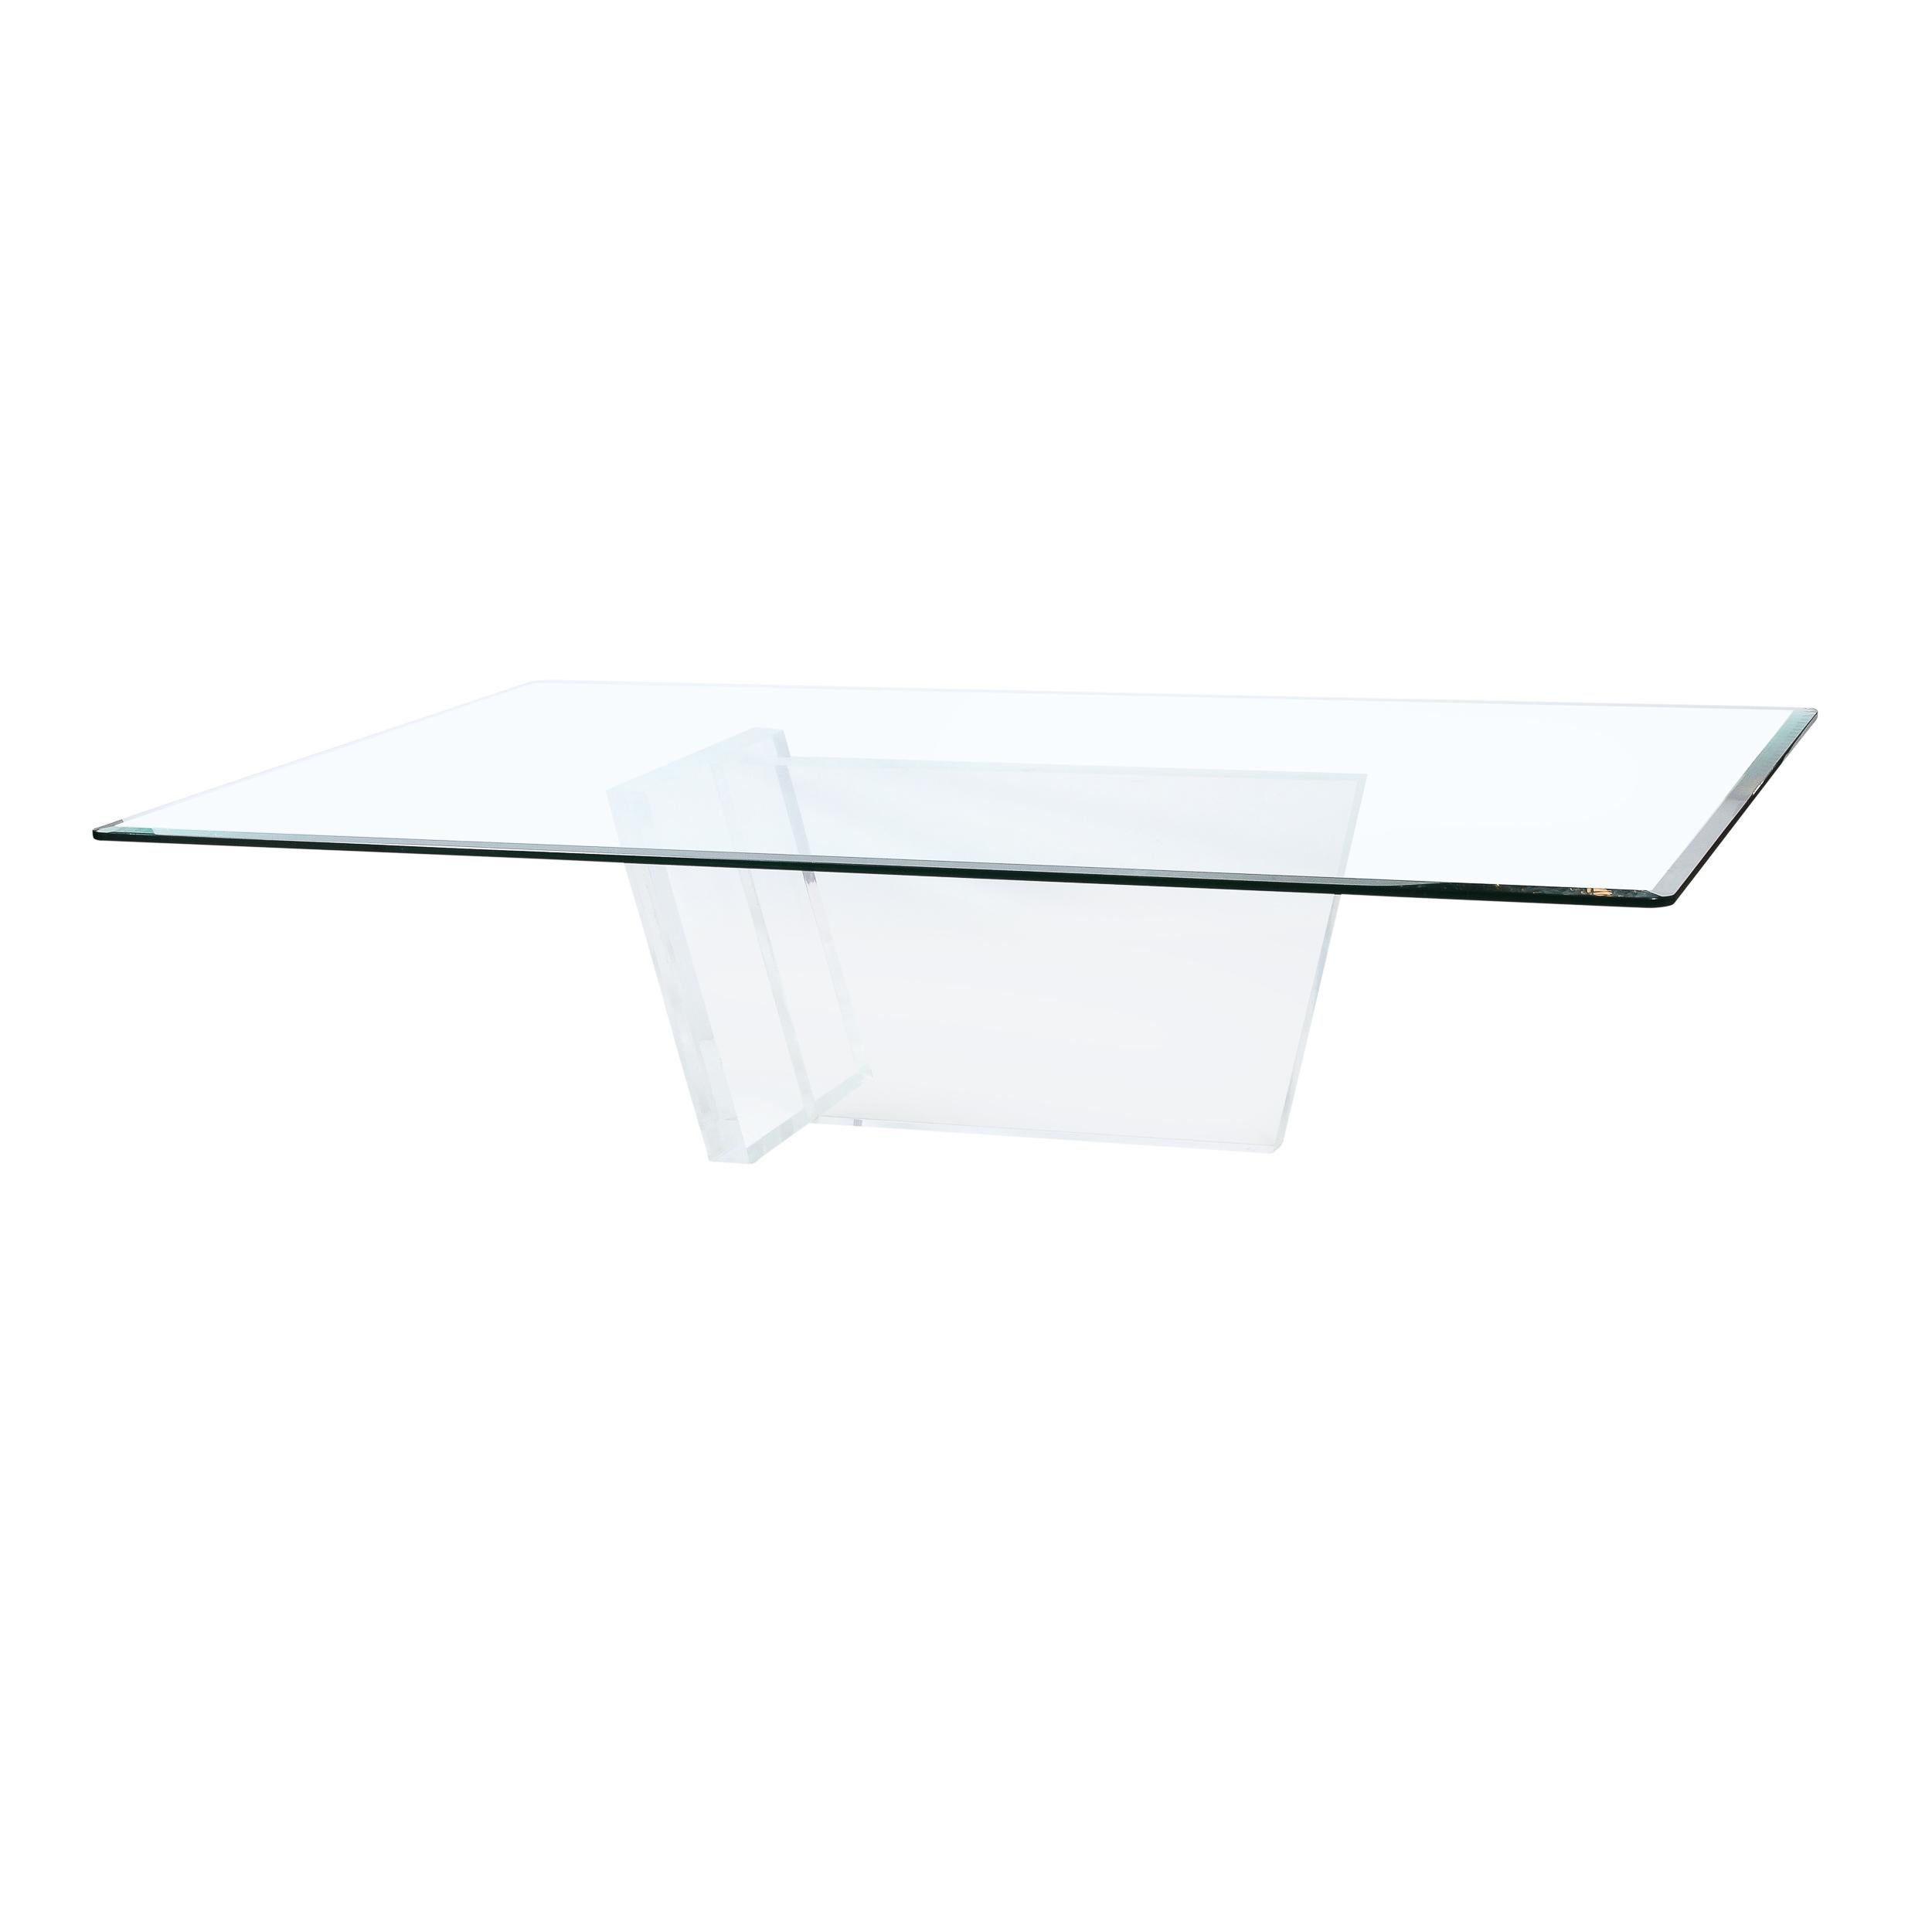 American Sculptural Mid-Century Modernist Glass and Lucite Cocktail Table For Sale